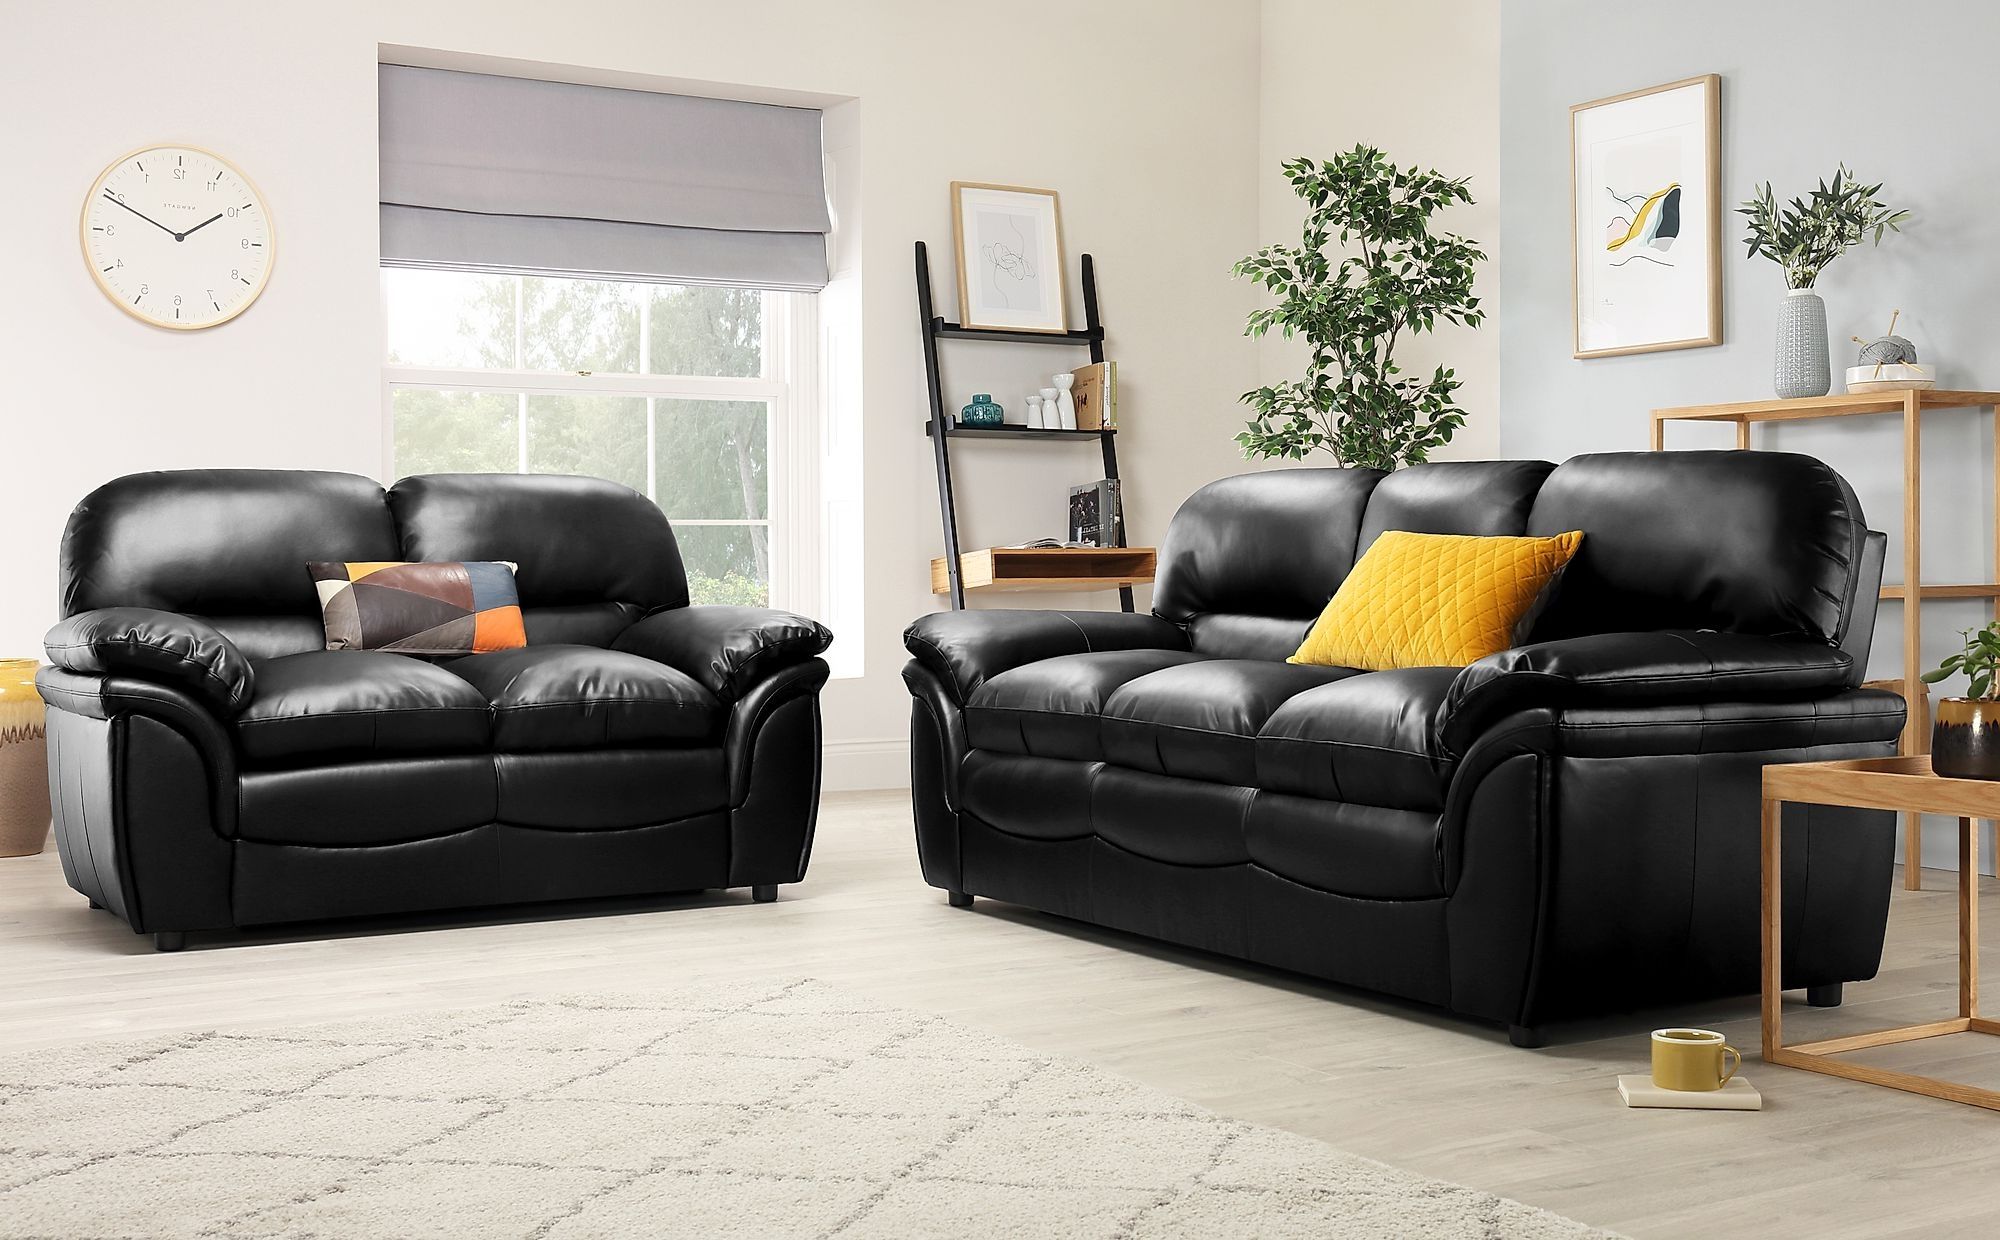 8 Photos Rochester Black Leather 3 Seater Sofa And Description – Alqu Blog Within Right Facing Black Sofas (View 13 of 20)